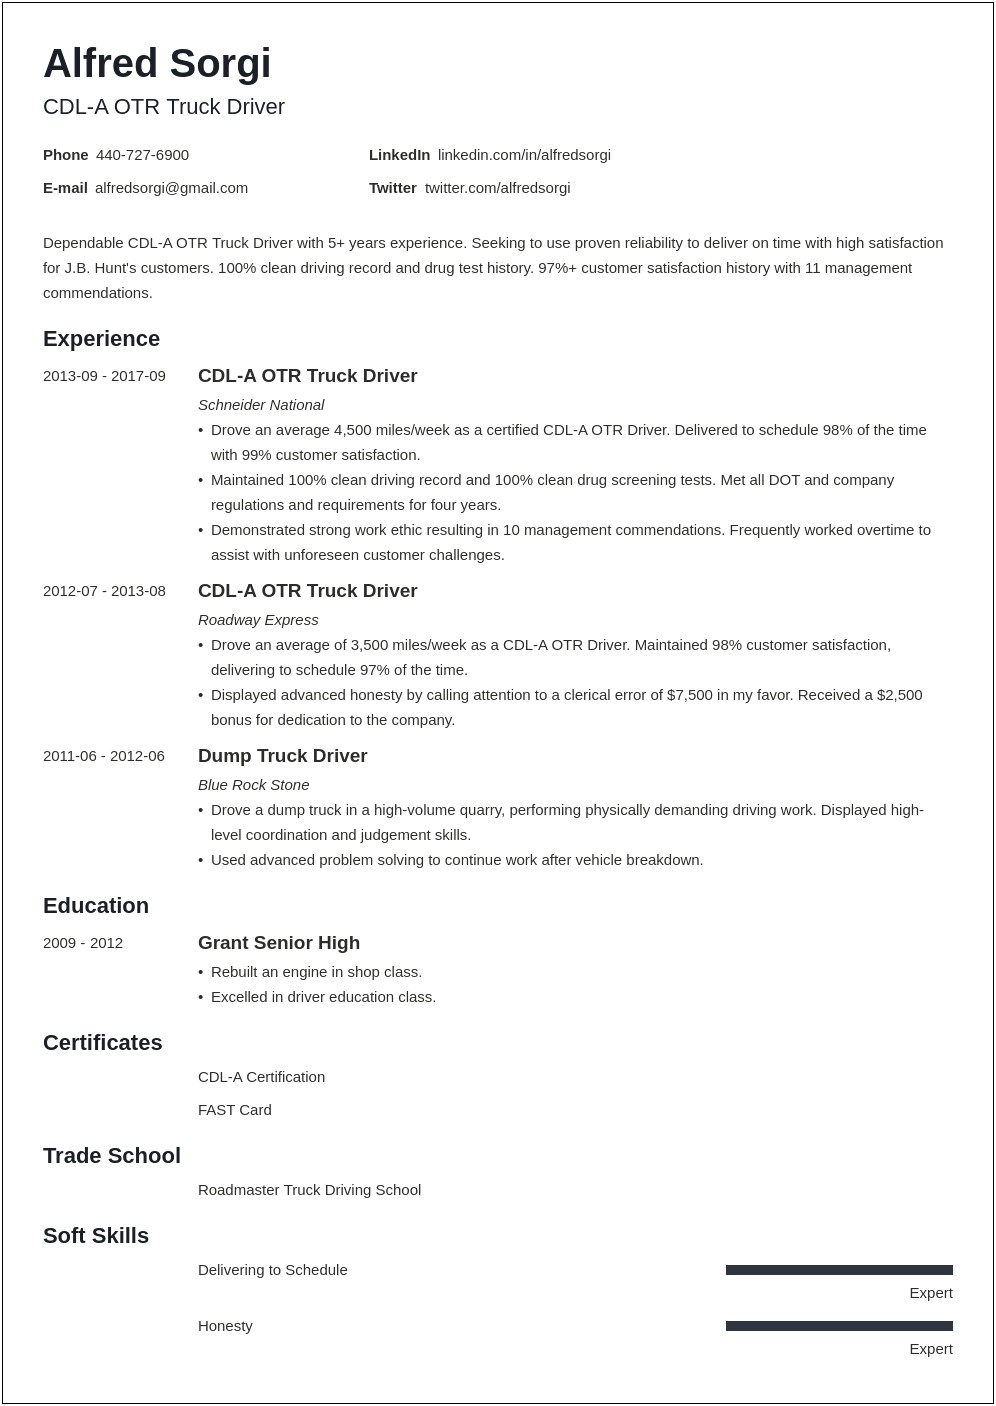 Career Objective Examples For Freight Resume